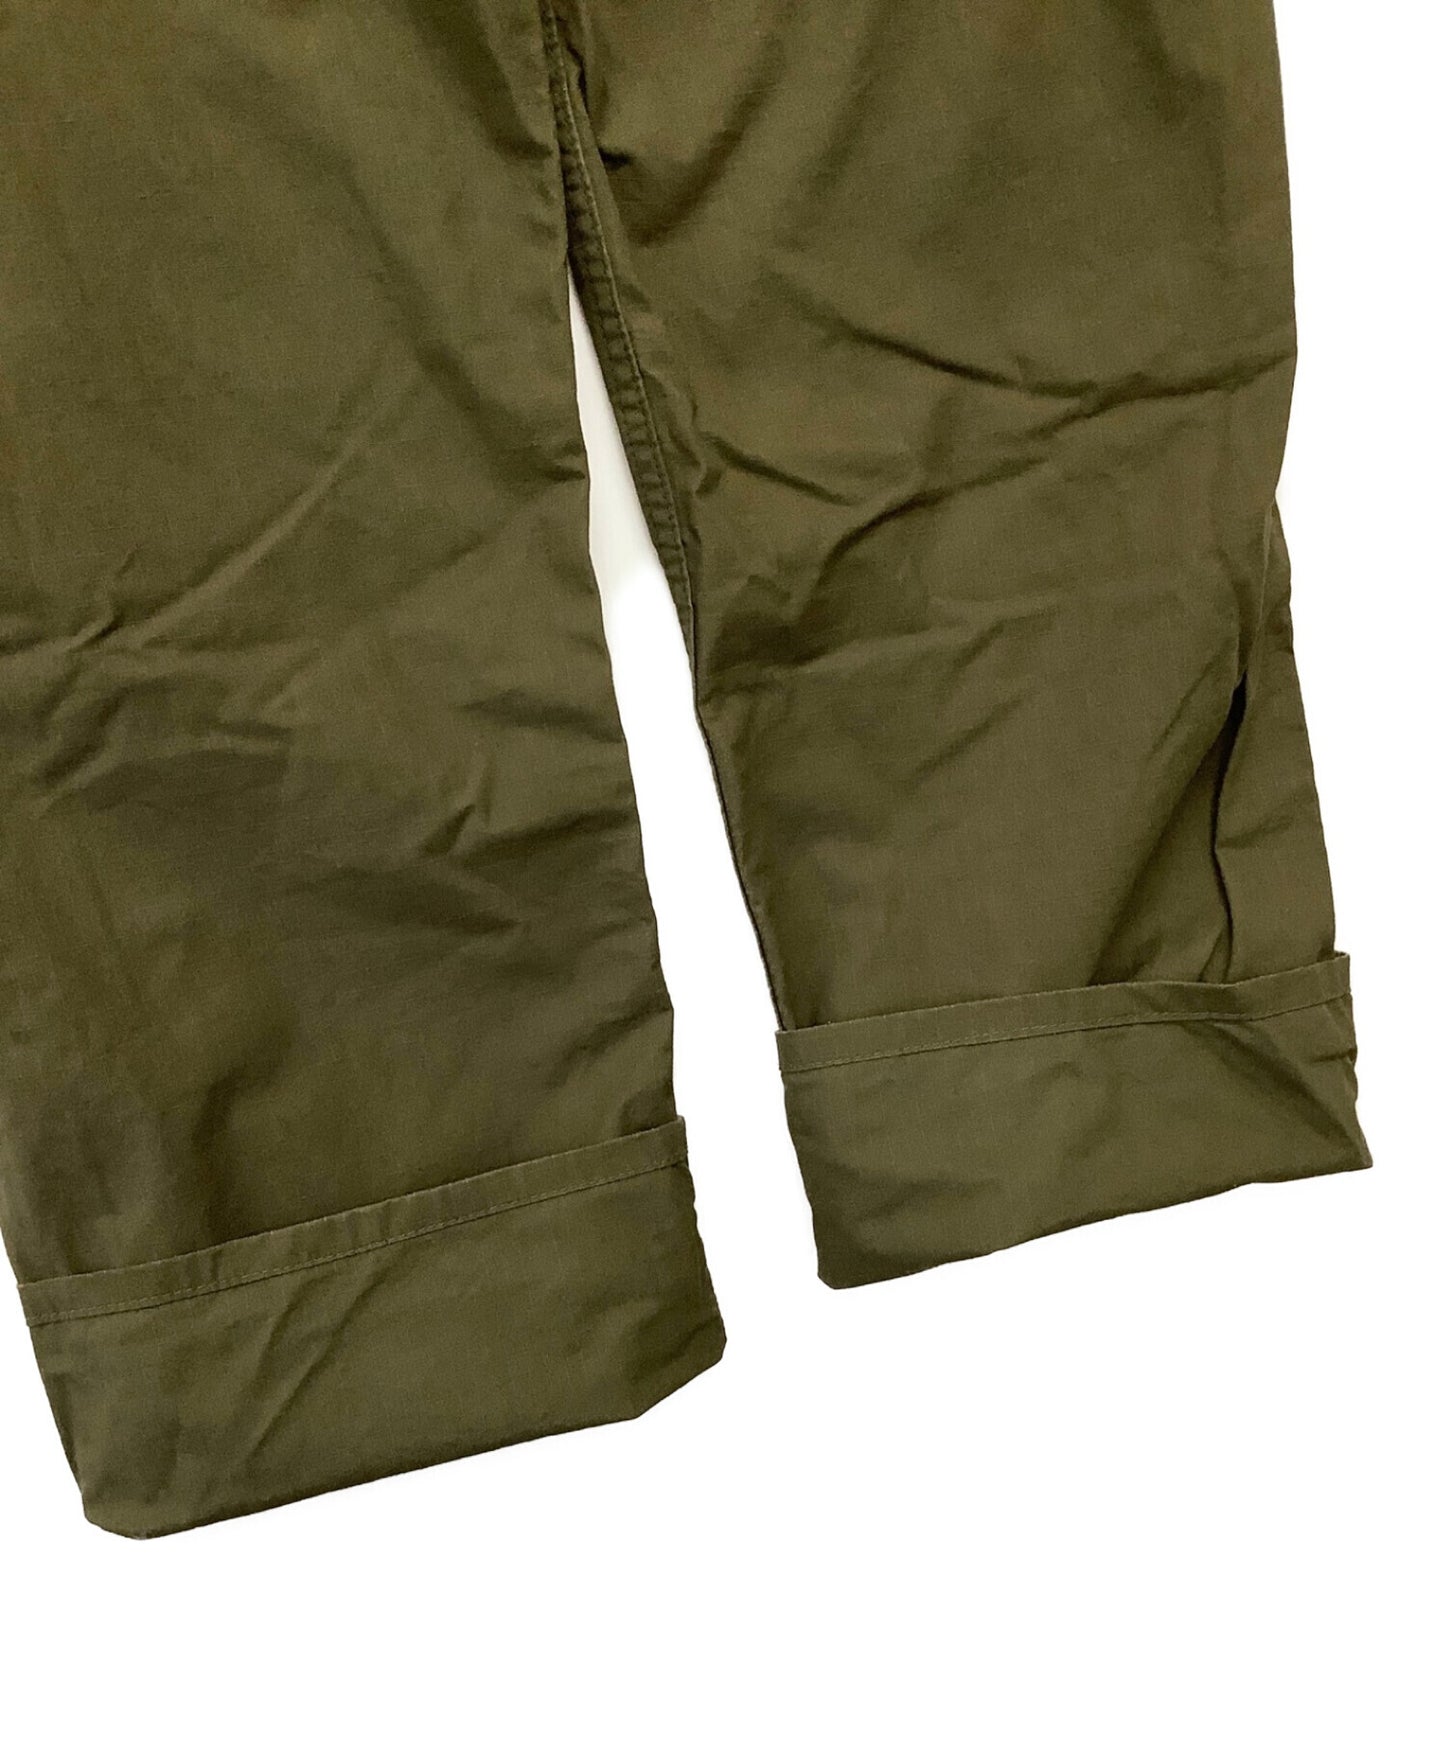 [Pre-owned] A BATHING APE cargo pants